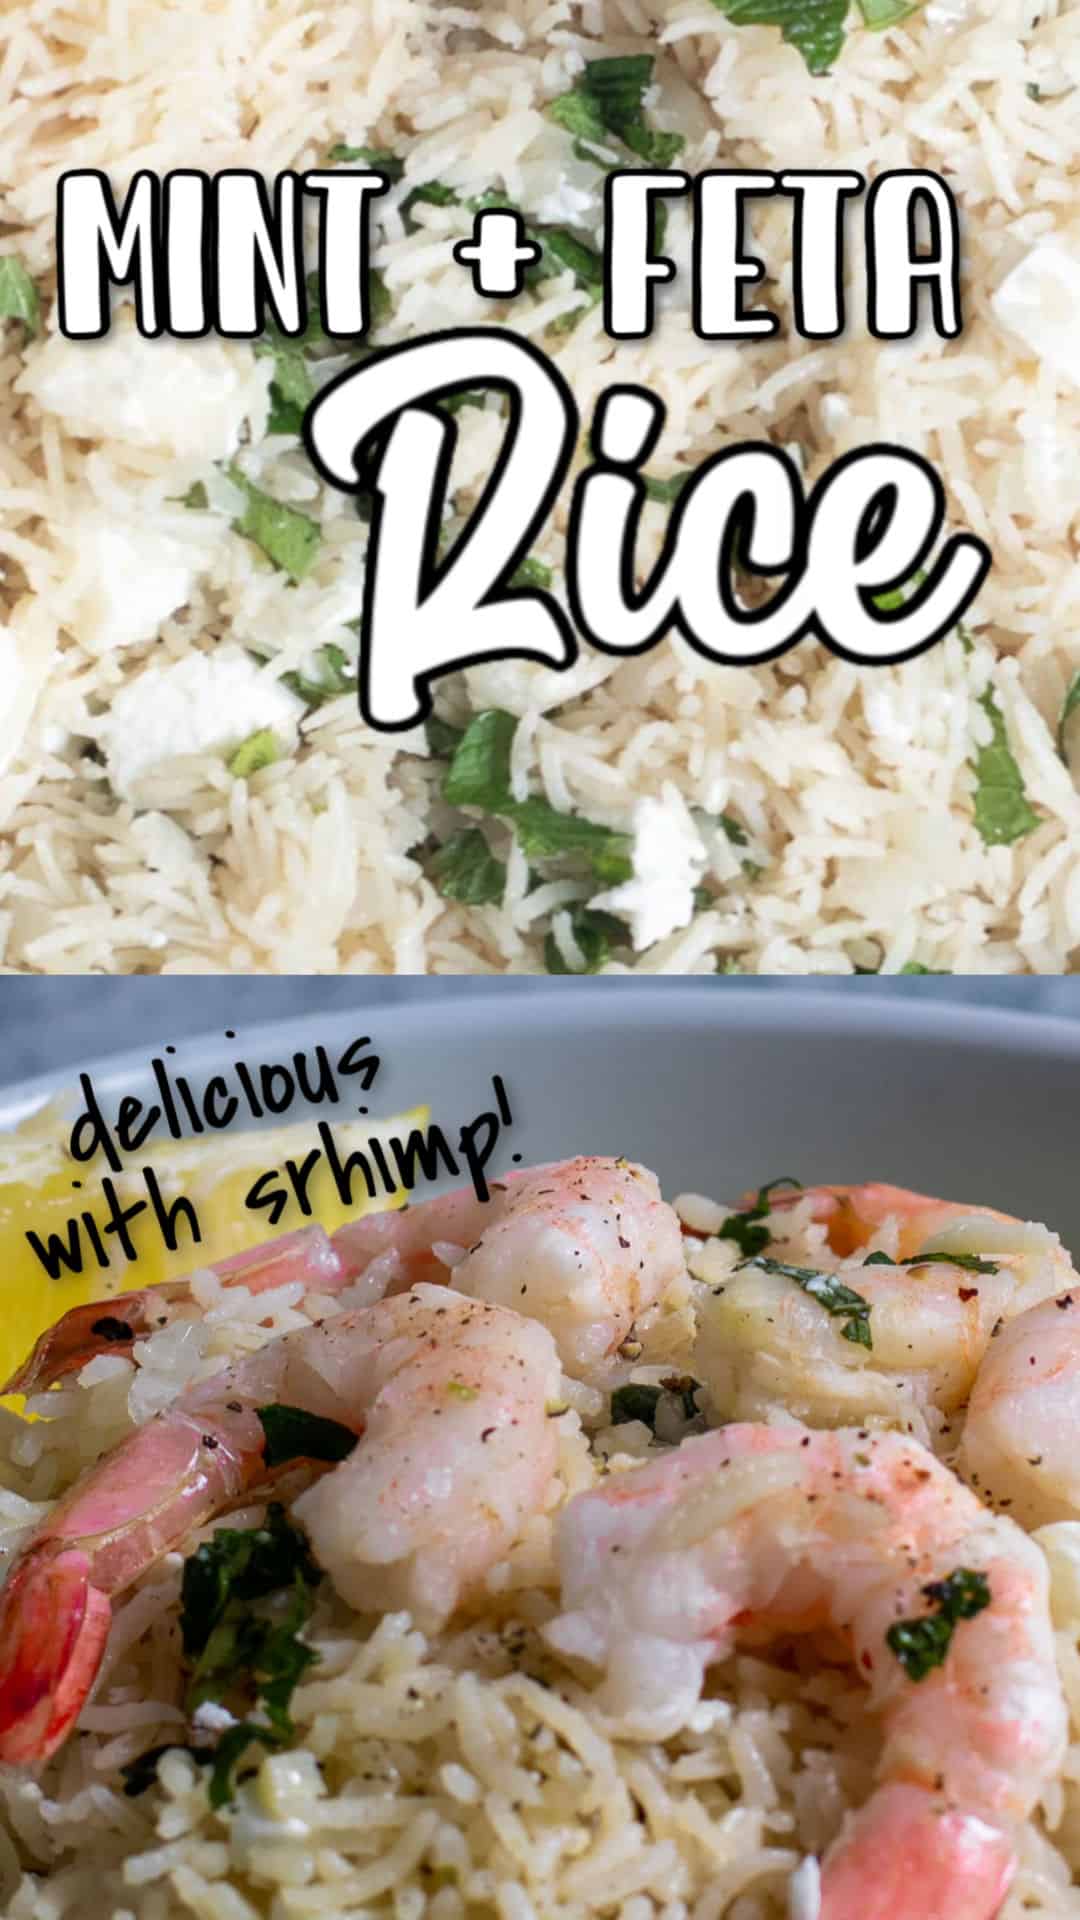 Mint and Feta cheese rice is perfect as a side dish. Top it with shrimp and you've got perfect lunch. 
#cheerfulcook #rice #mint #lunch #sidedish #feta  ♡ cheerfulcook.com via @cheerfulcook